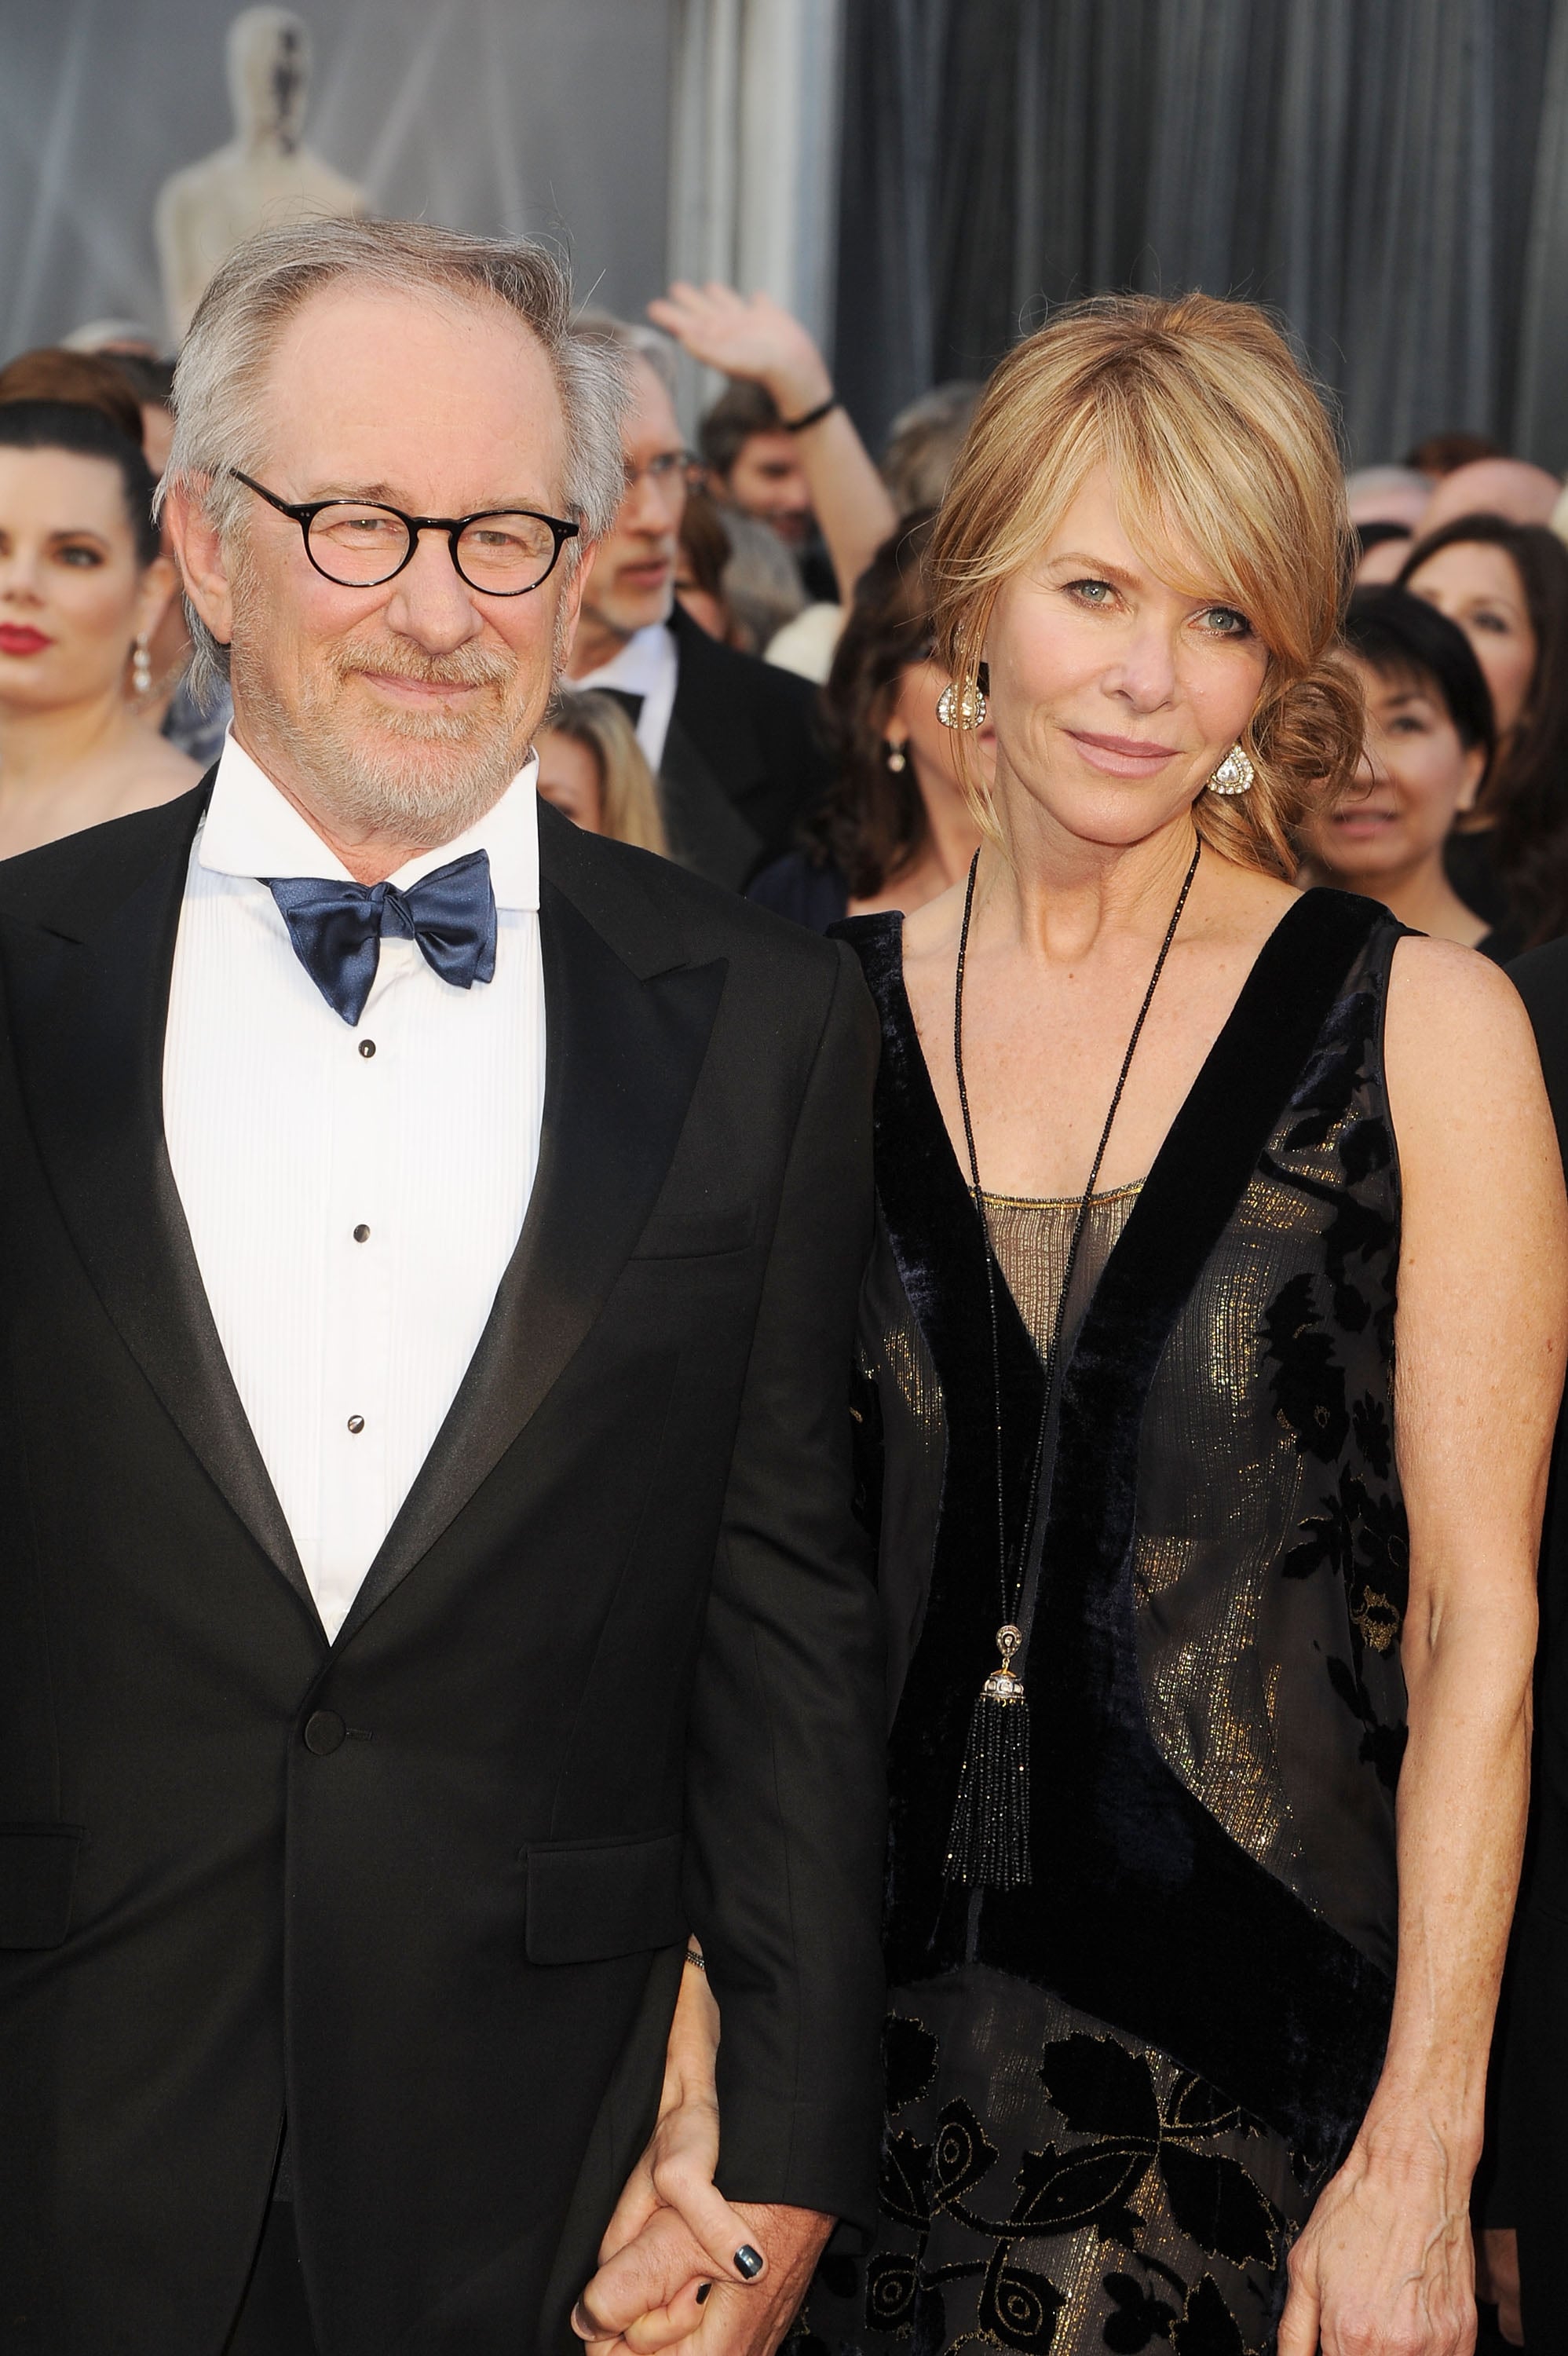 Steven Spielberg and Kate Capshaw Oscar Couples Shine at the Big Show